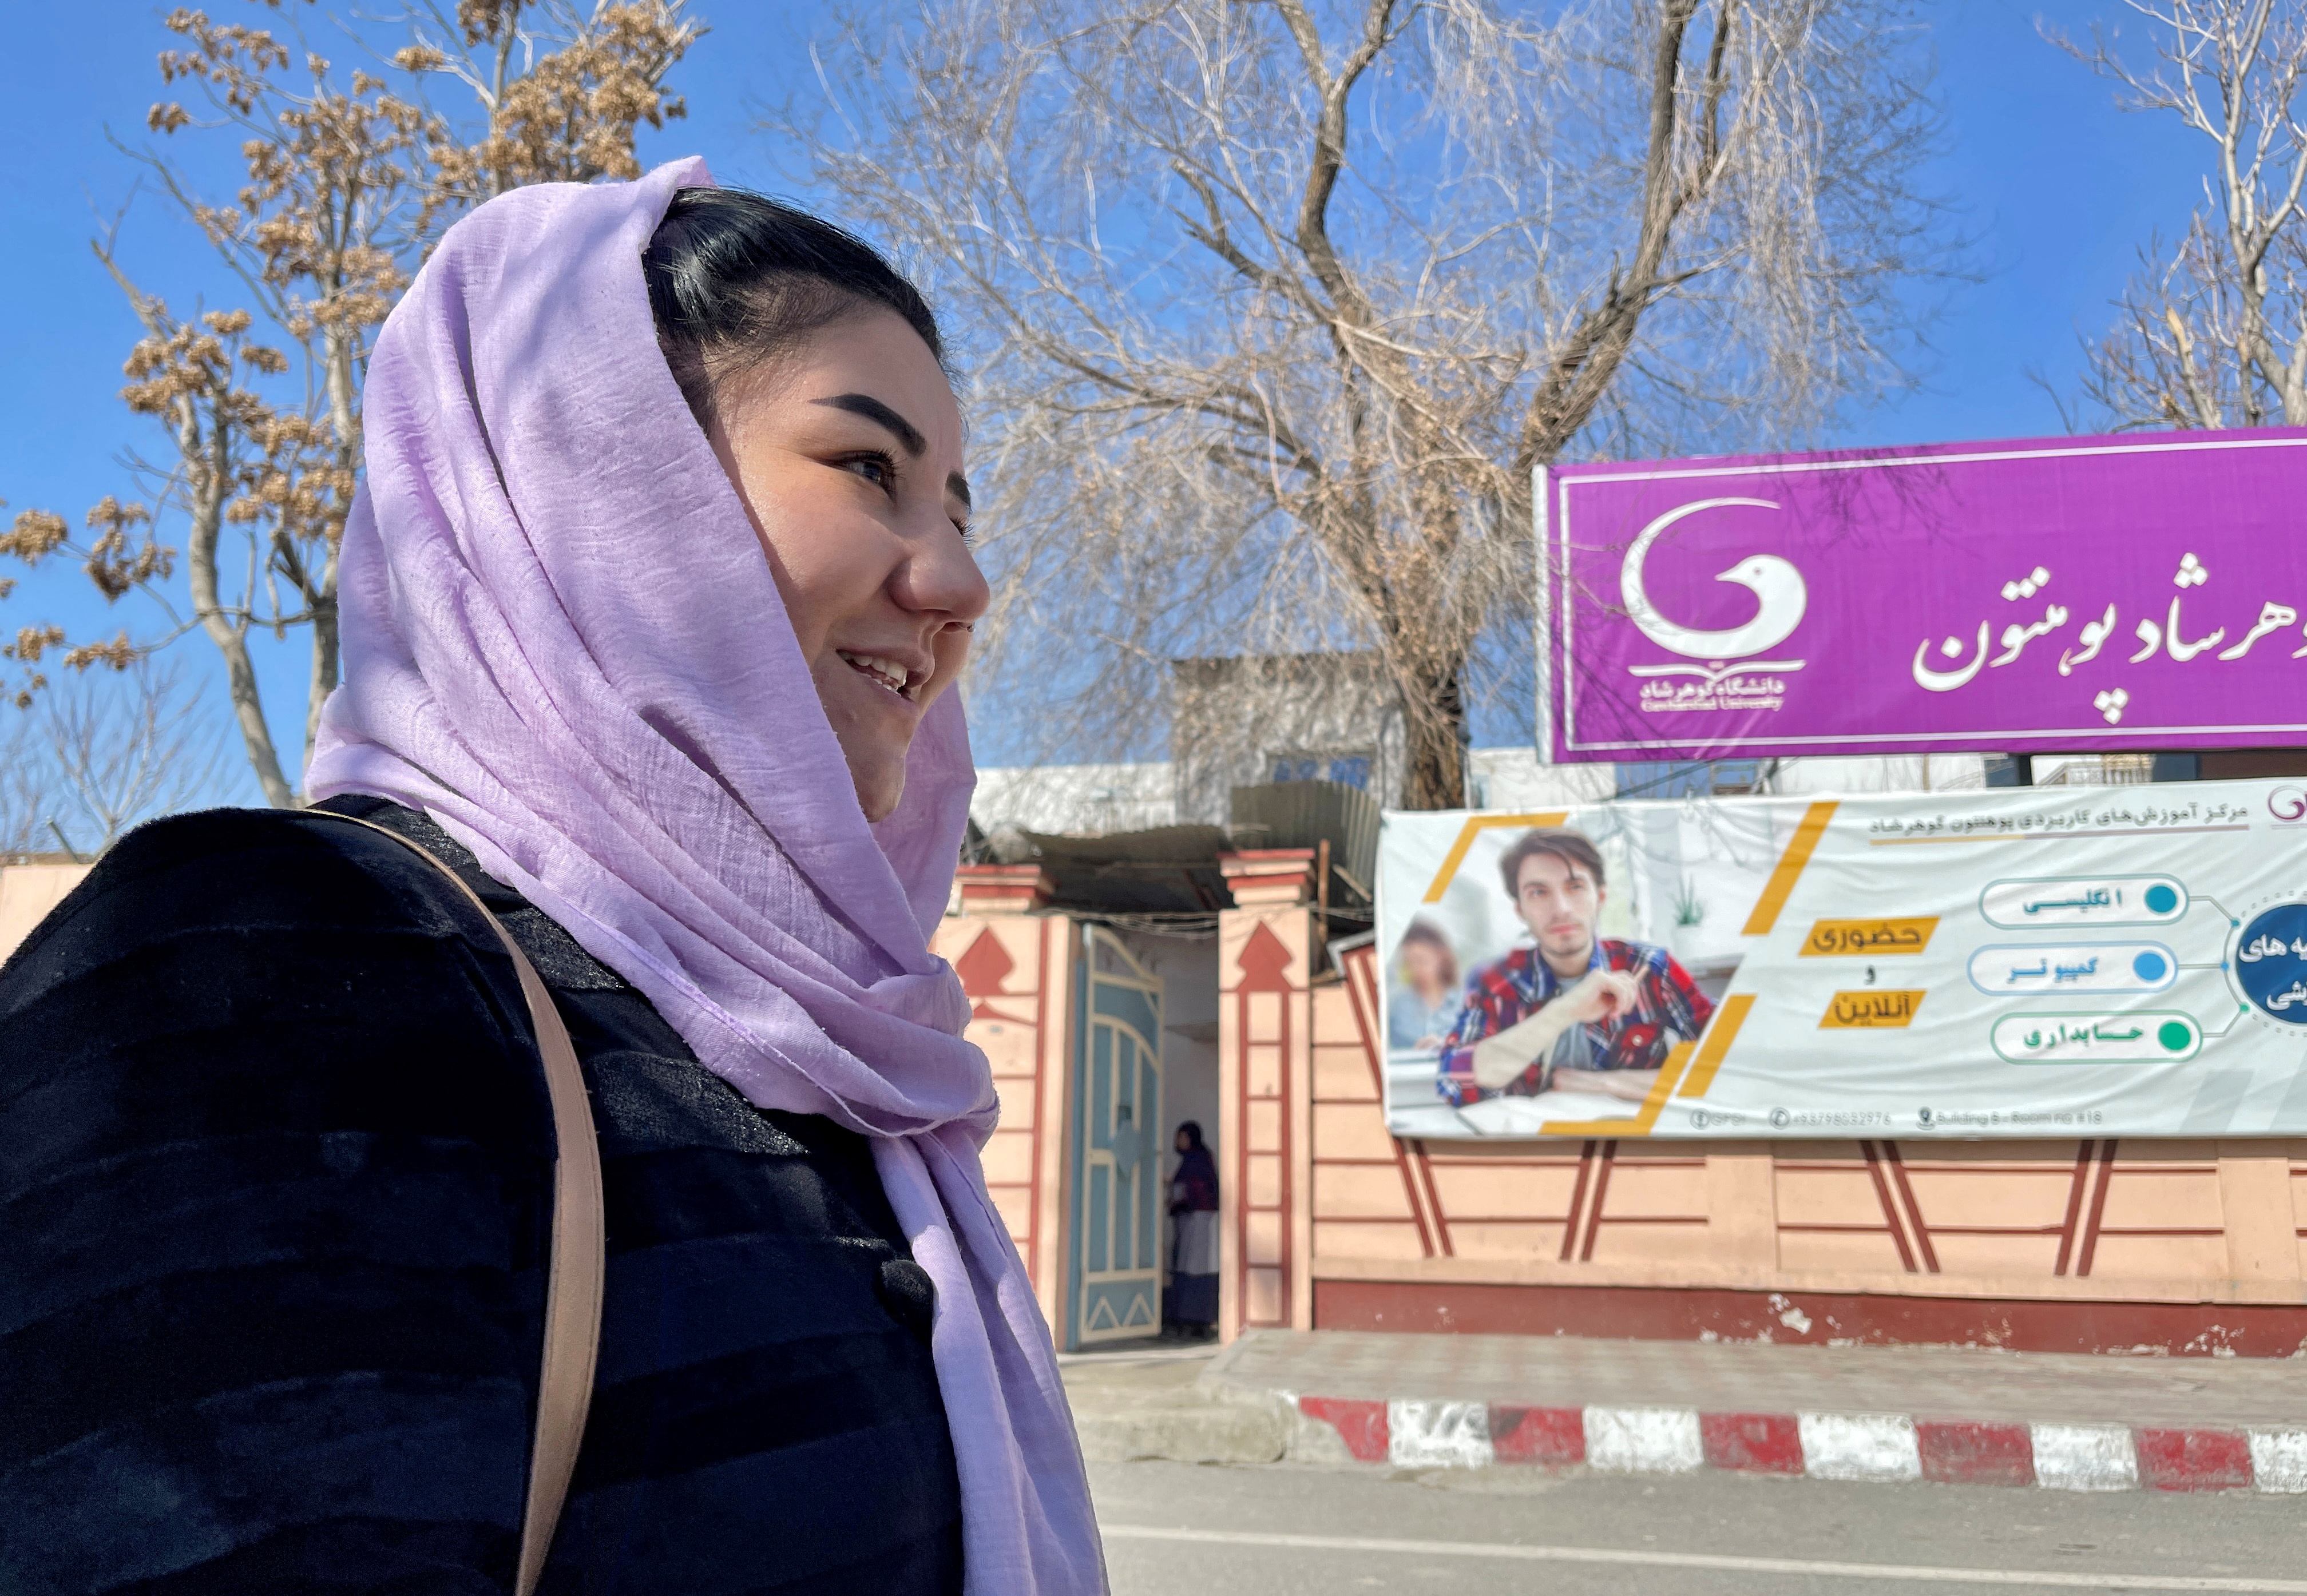 Waheeda Bayat, a 24-year-old student, stands outside Gawharshad University in Kabul, Afghanistan February 24, 2022. REUTERS/Stringer